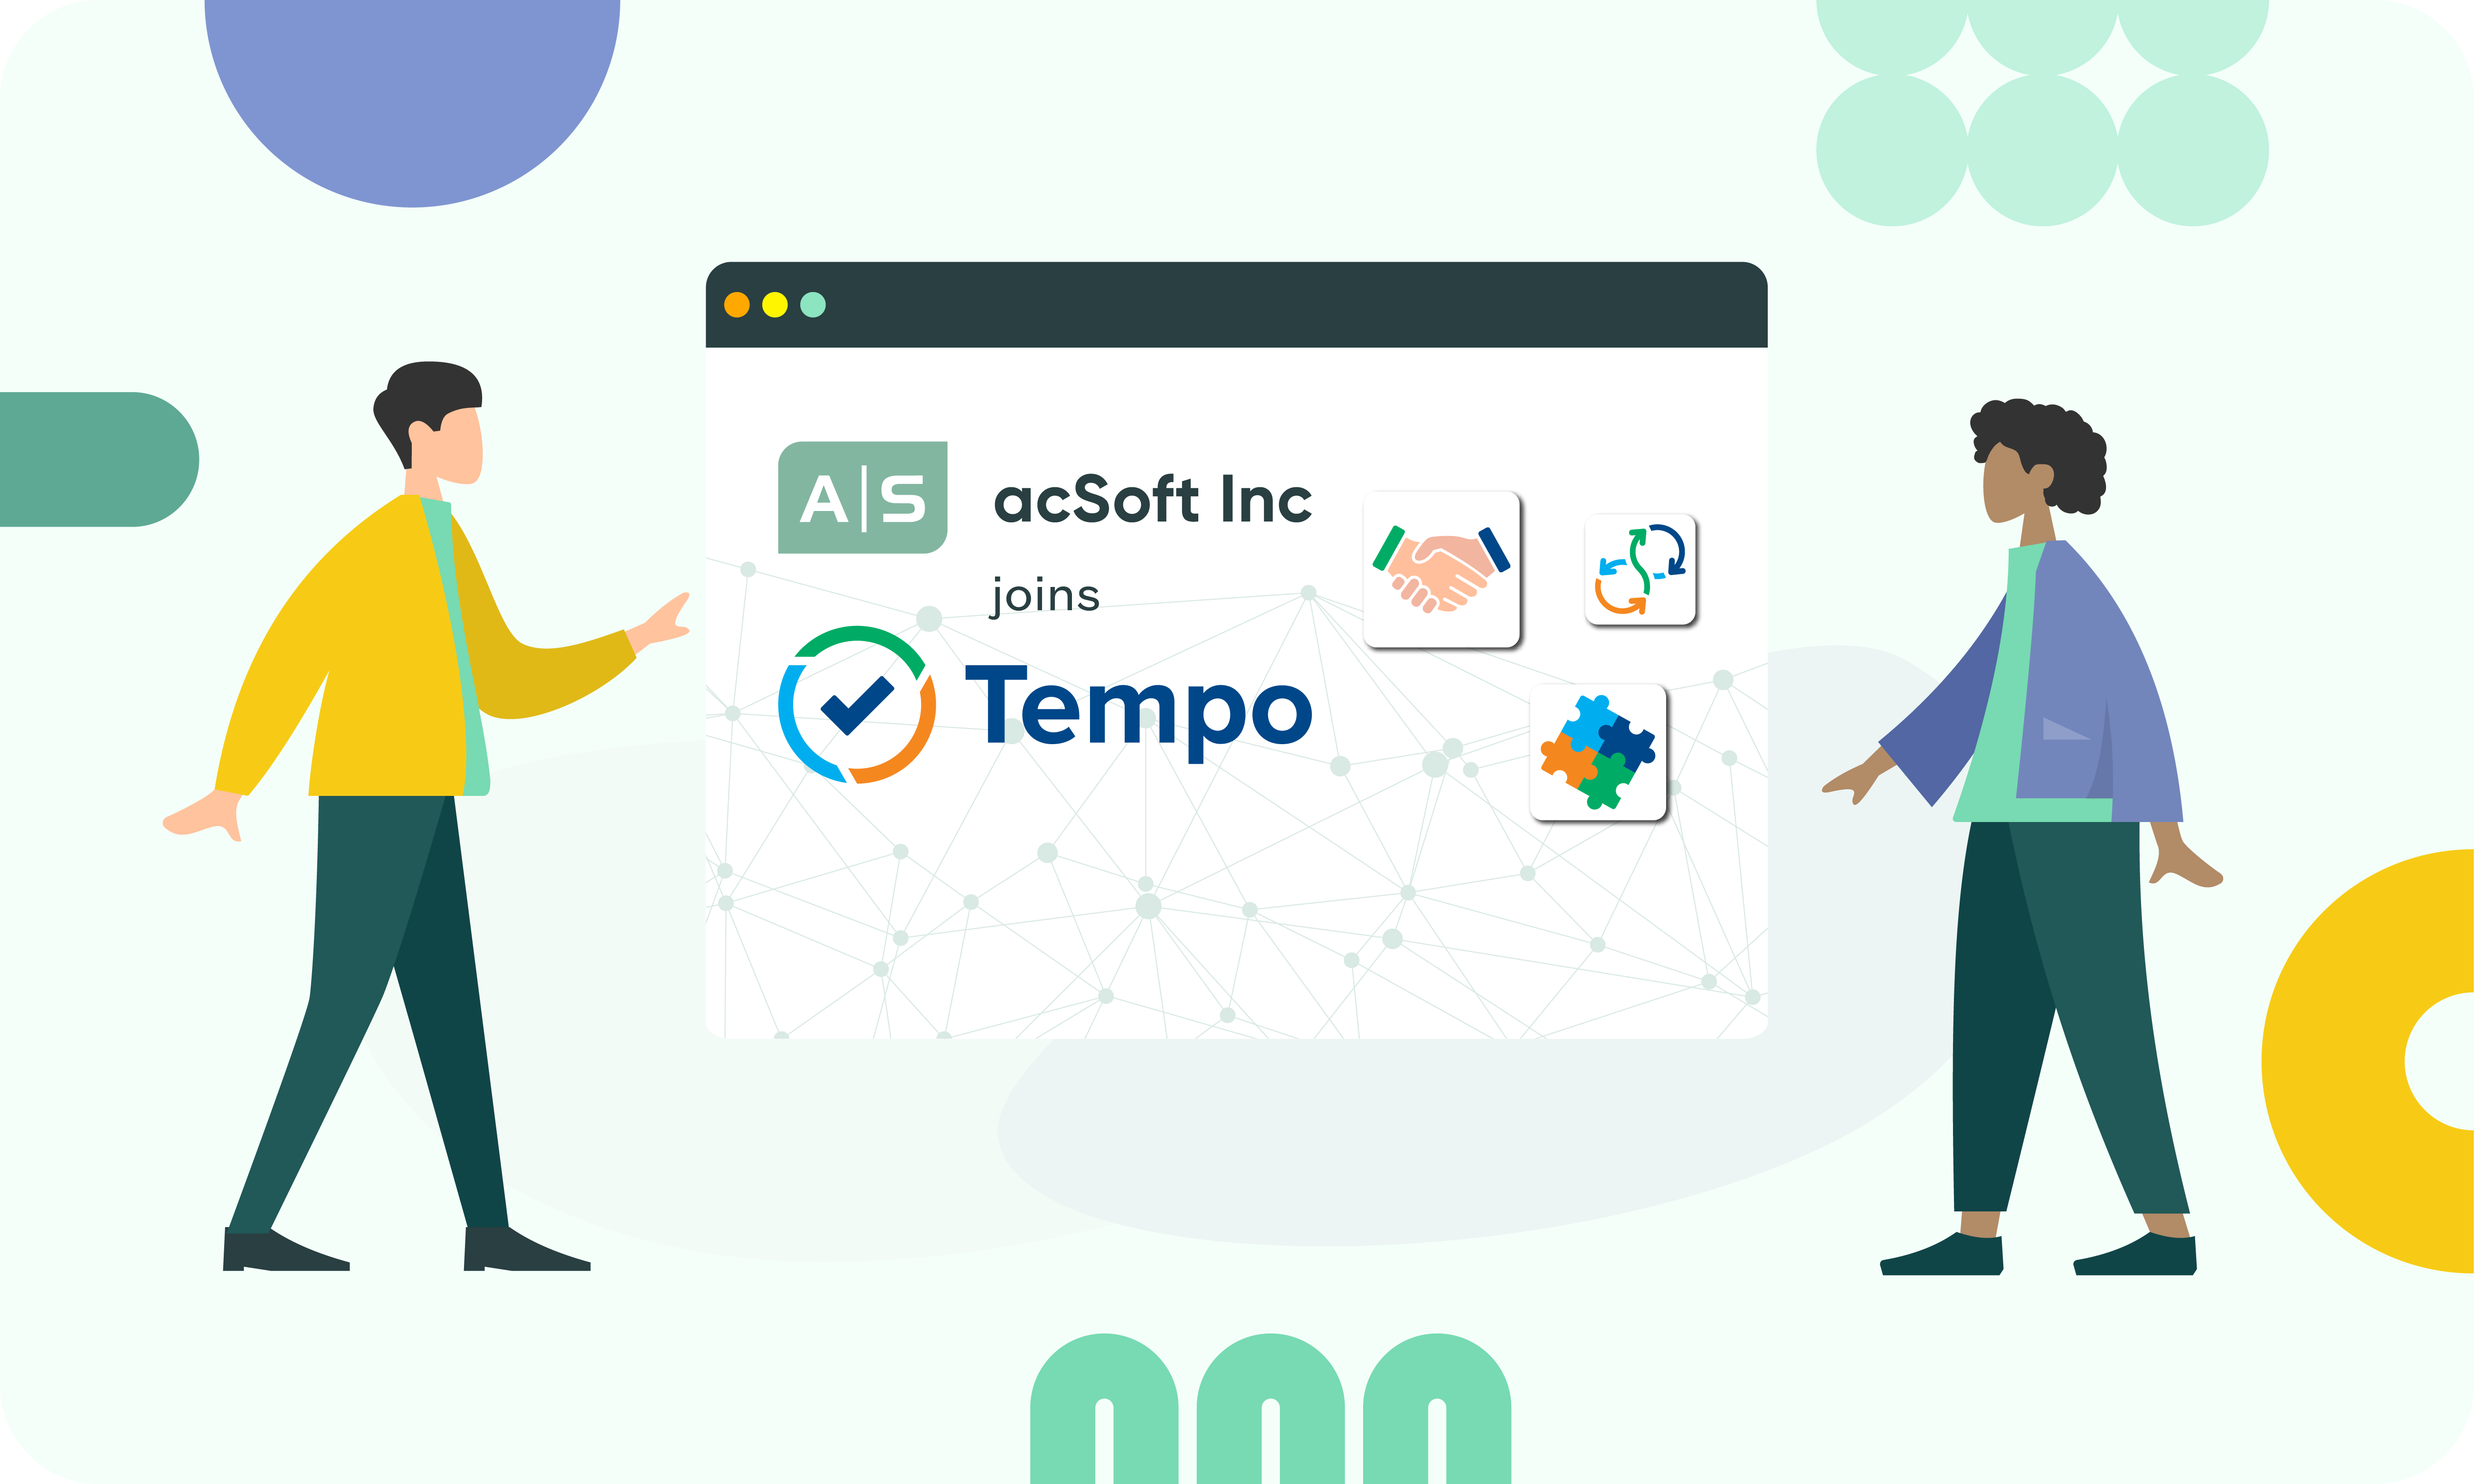 acSoft Inc Enters a New Chapter: Acquisition by Tempo Software